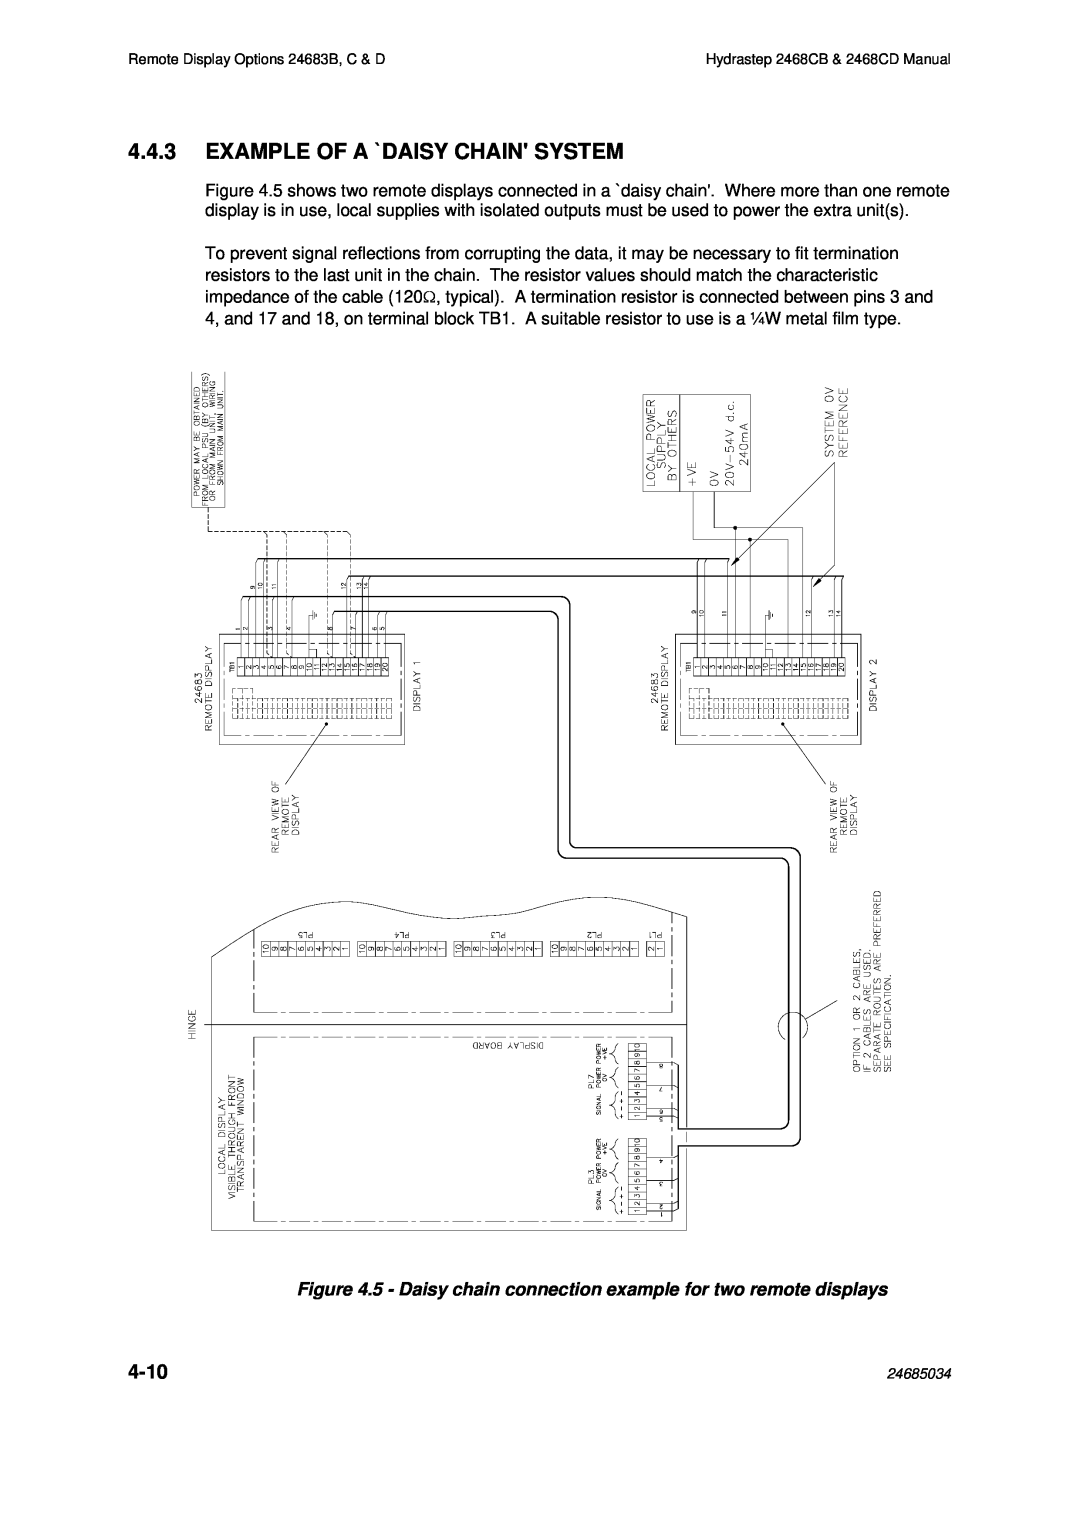 Emerson 2468CB, 2468CD manual 4.4.3EXAMPLE OF A `DAISY CHAIN SYSTEM, 4-10 